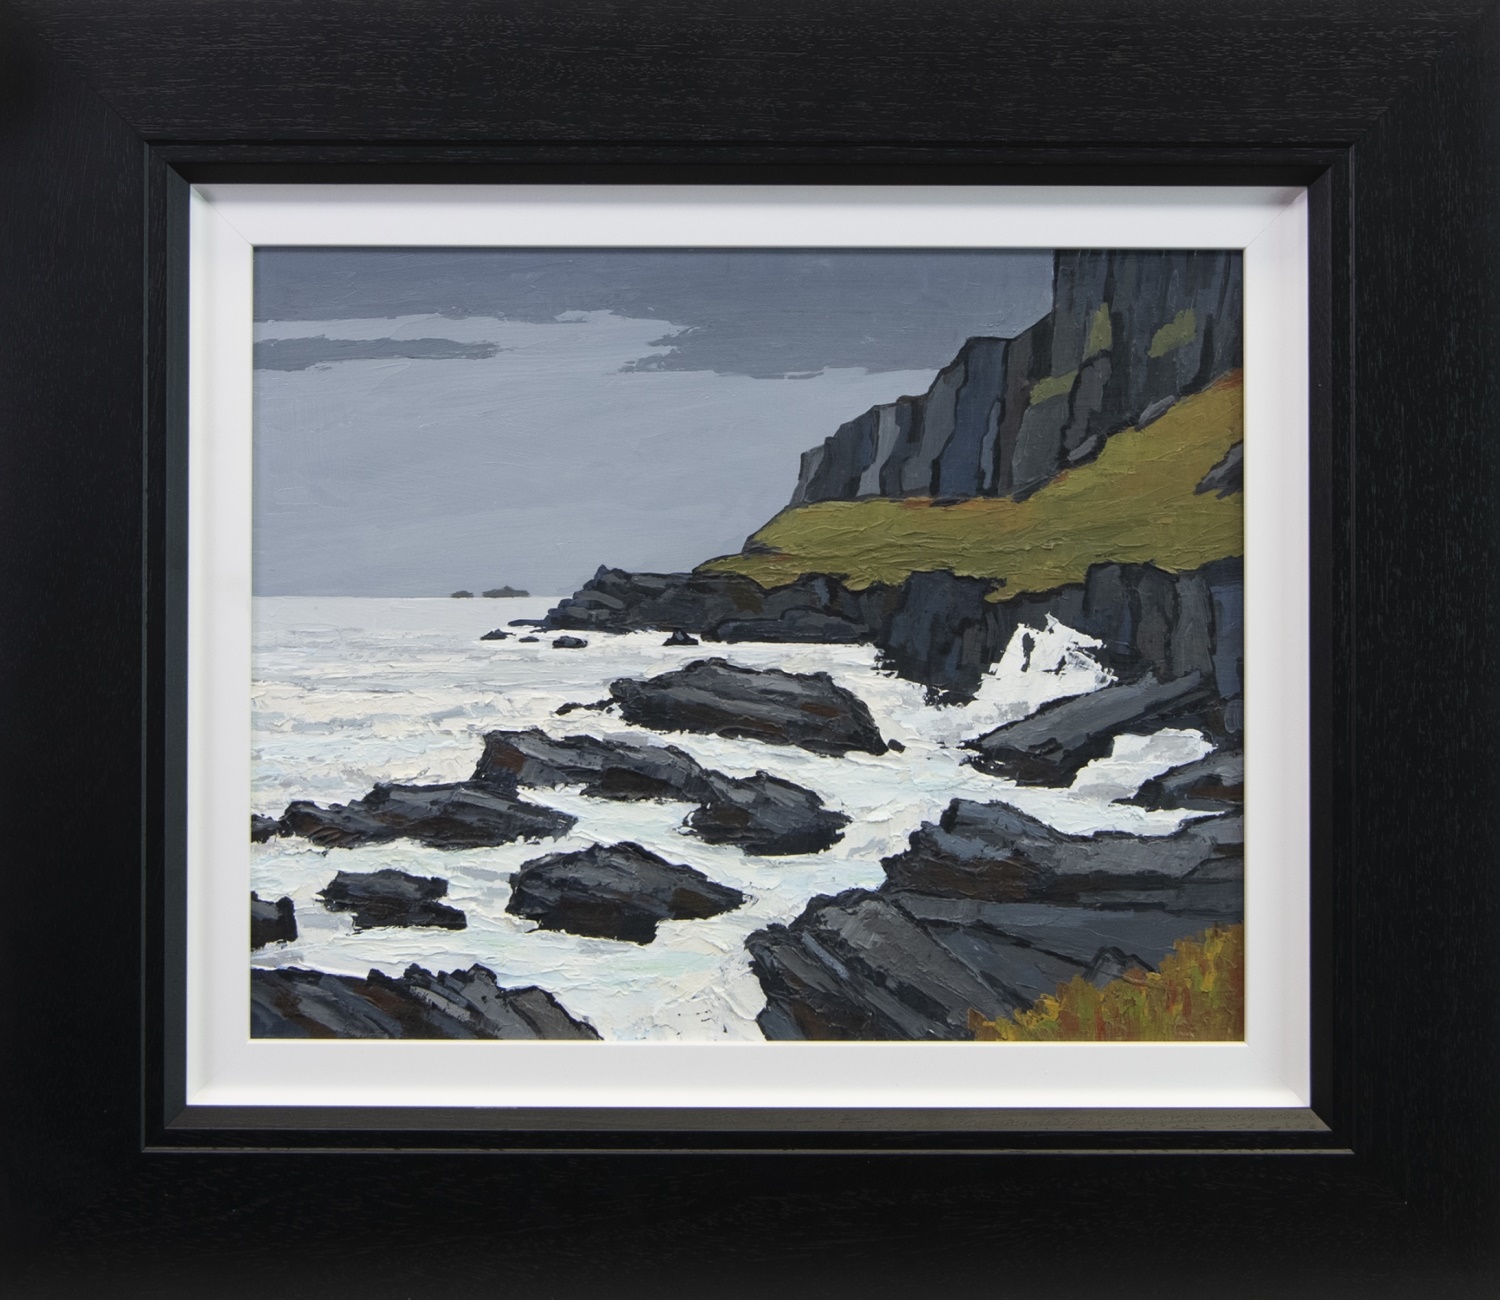 ROUGH SEAS ON THE EAST COAST OF LEWIS, AN OIL BY DAVID BARNES